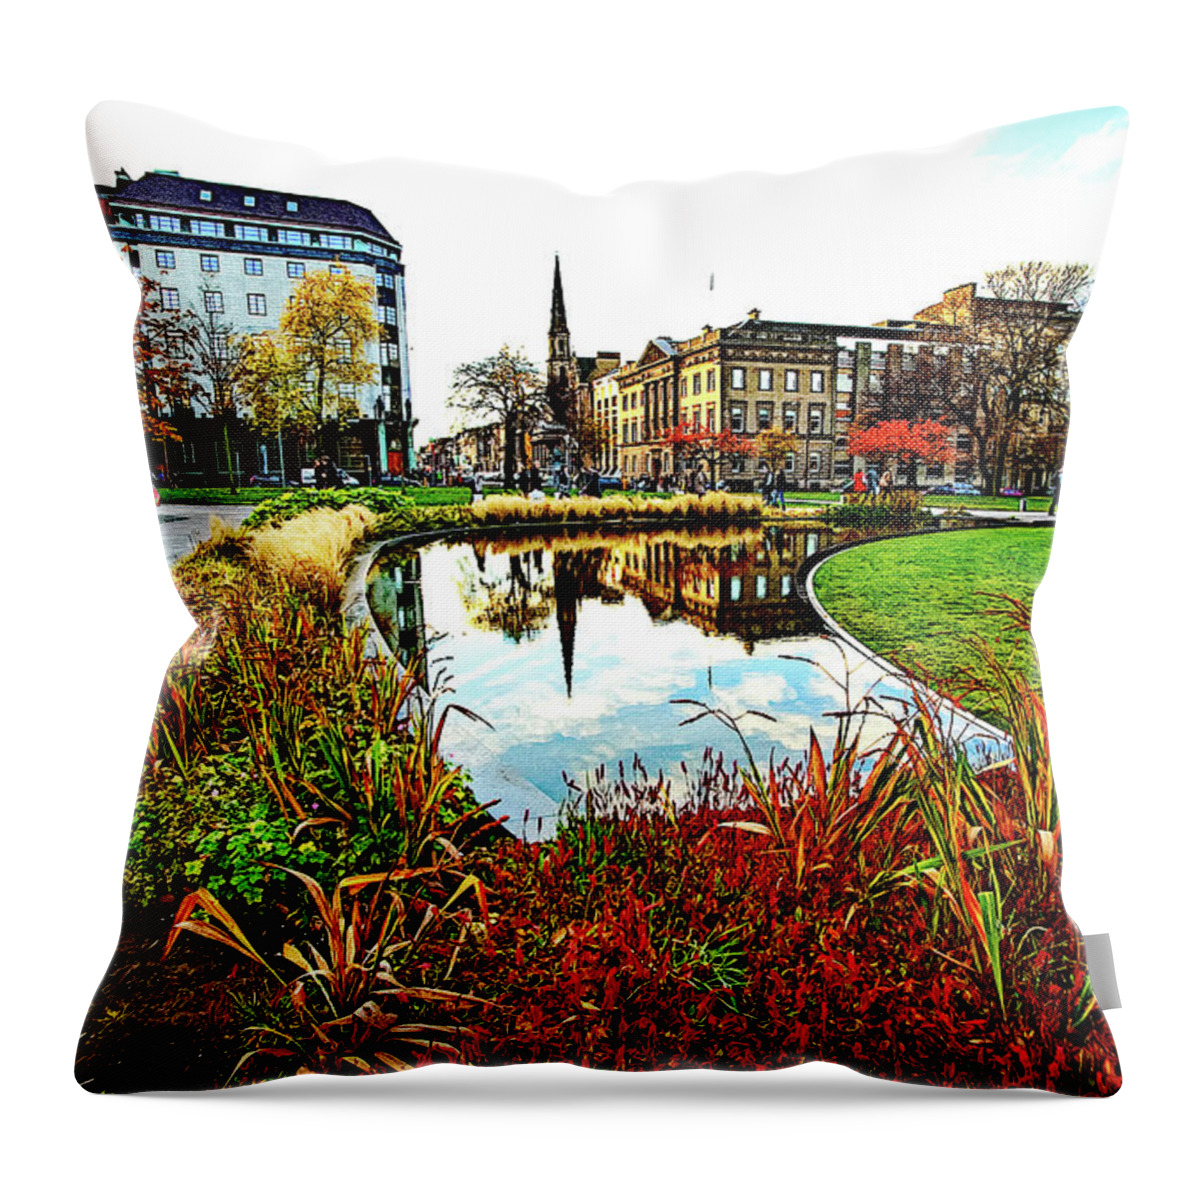 Scotland Throw Pillow featuring the digital art St George's Square by SnapHappy Photos